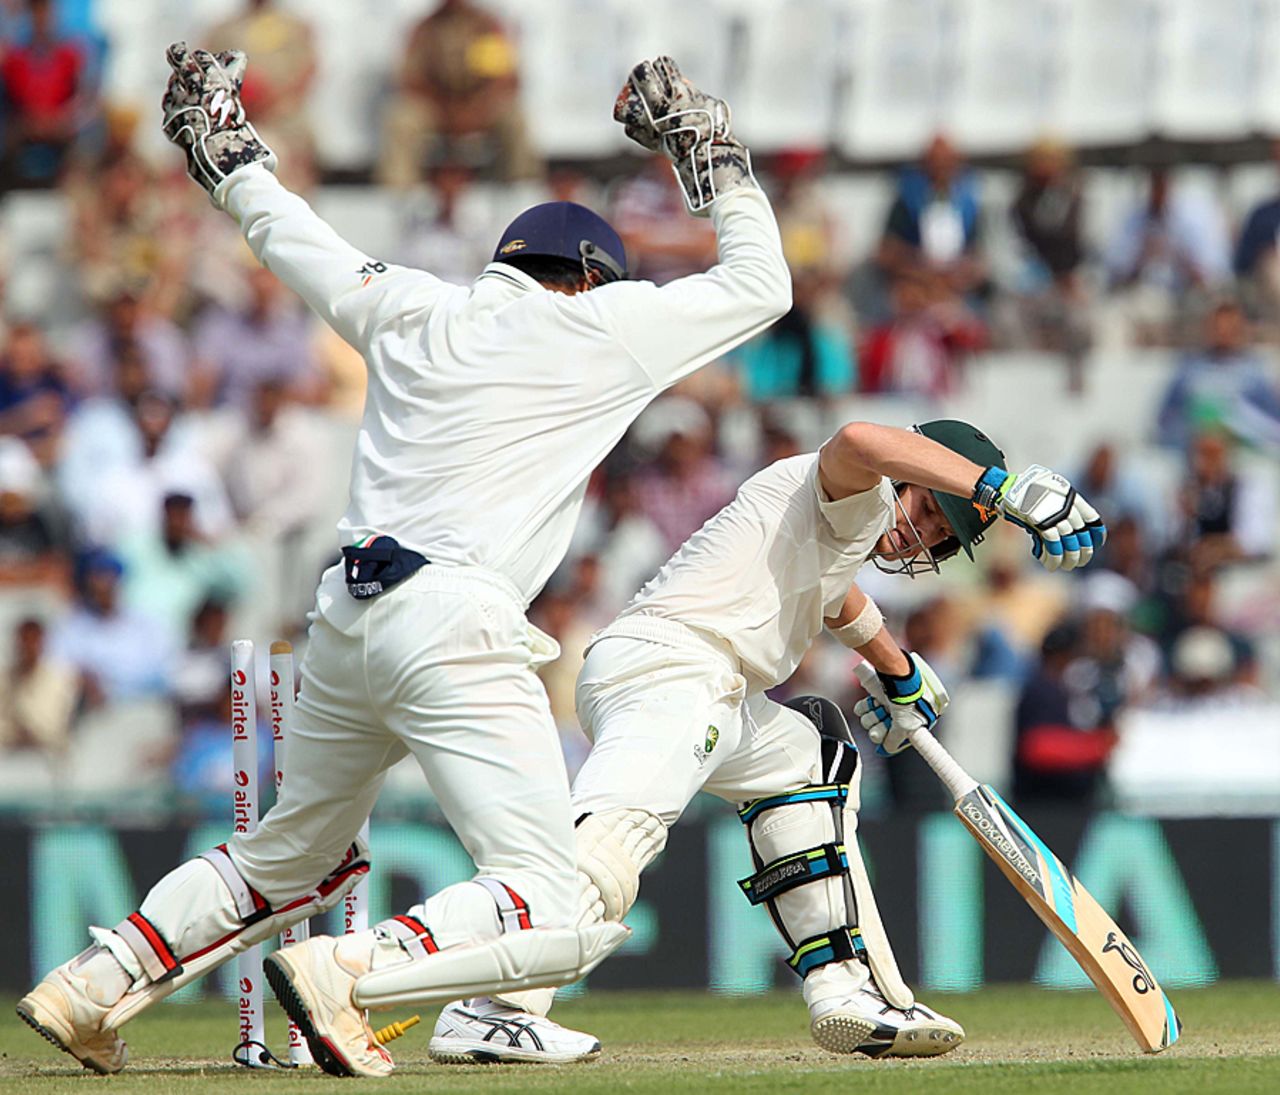 Steven Smith is stumped for 92, India v Australia, 3rd Test, Mohali, 3rd day, March 16, 2013